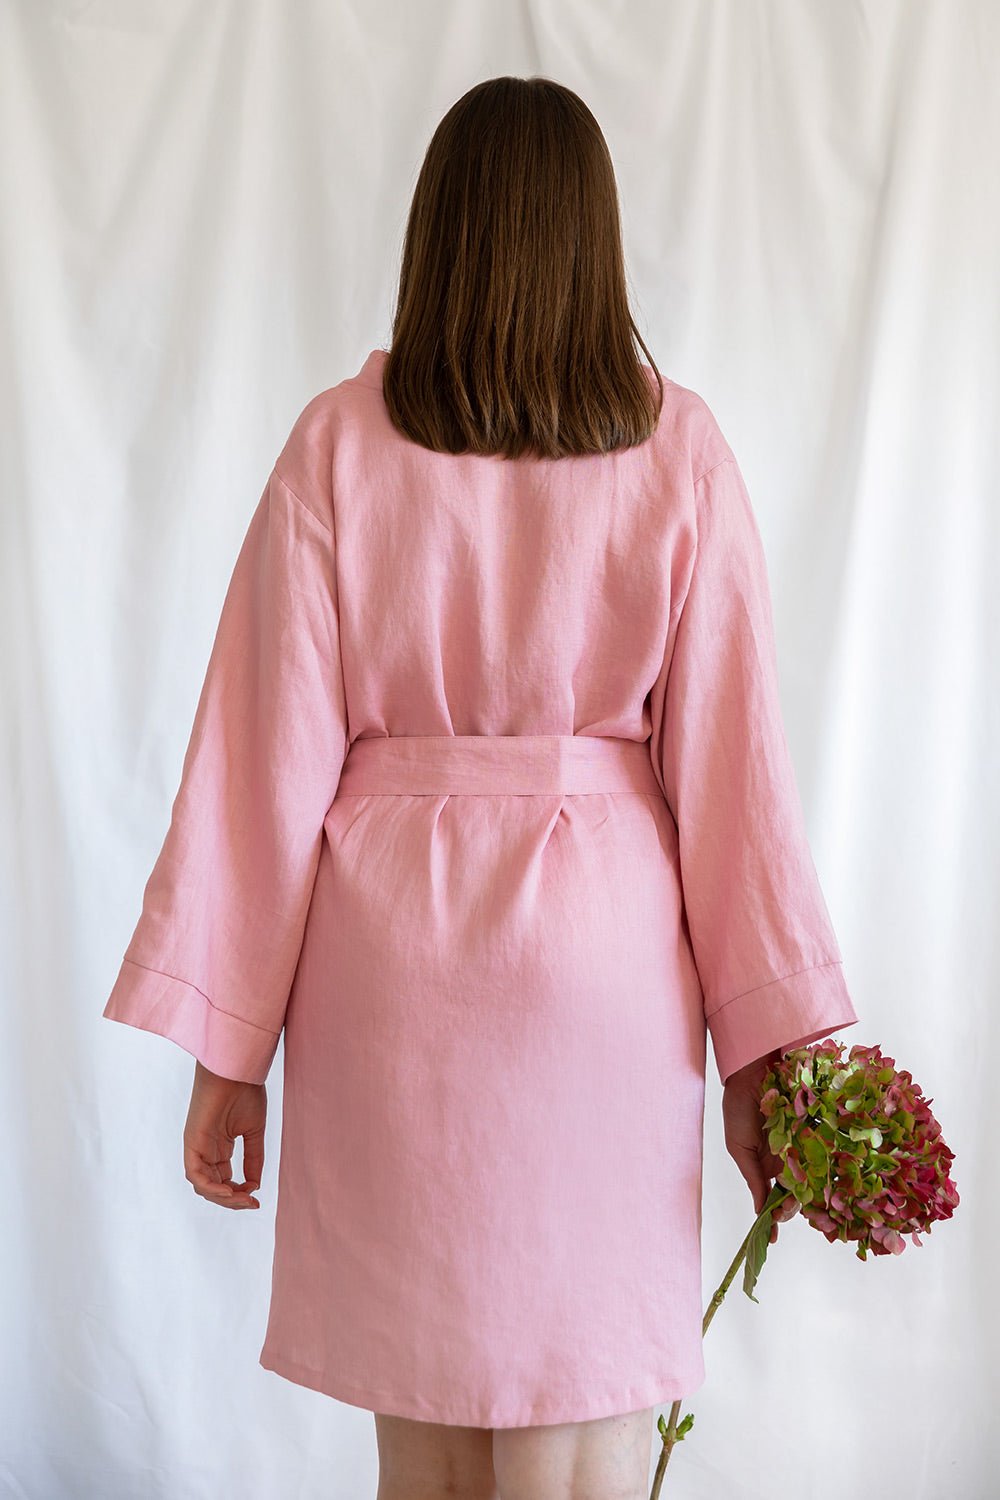 Pink cotton bridesmaid robes NZ 100% linen for bridal party